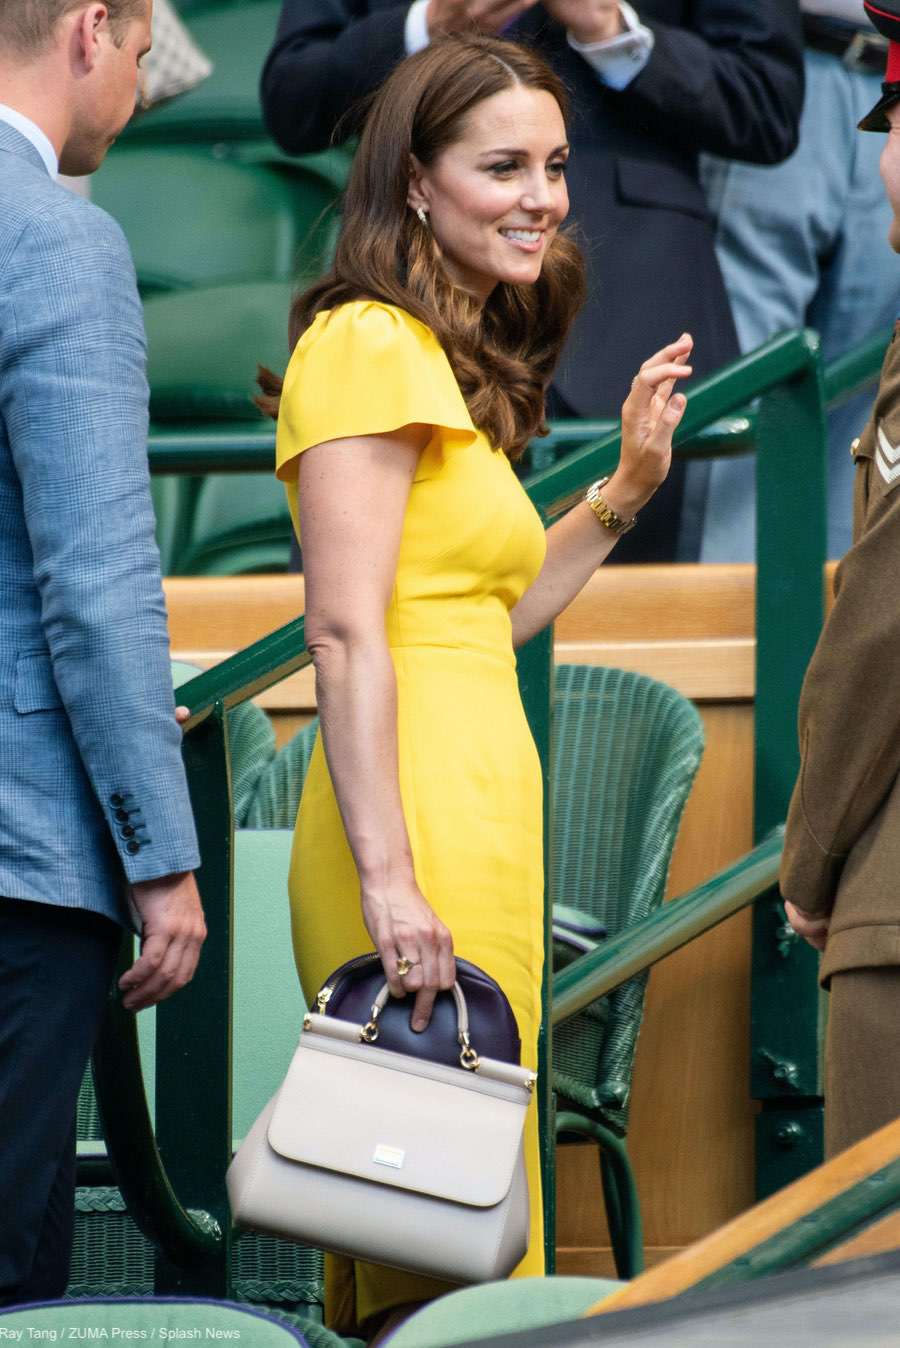 The Duchess of Cambridge carrying her Dolce & Gabbana bag at Wimbledon in 2018